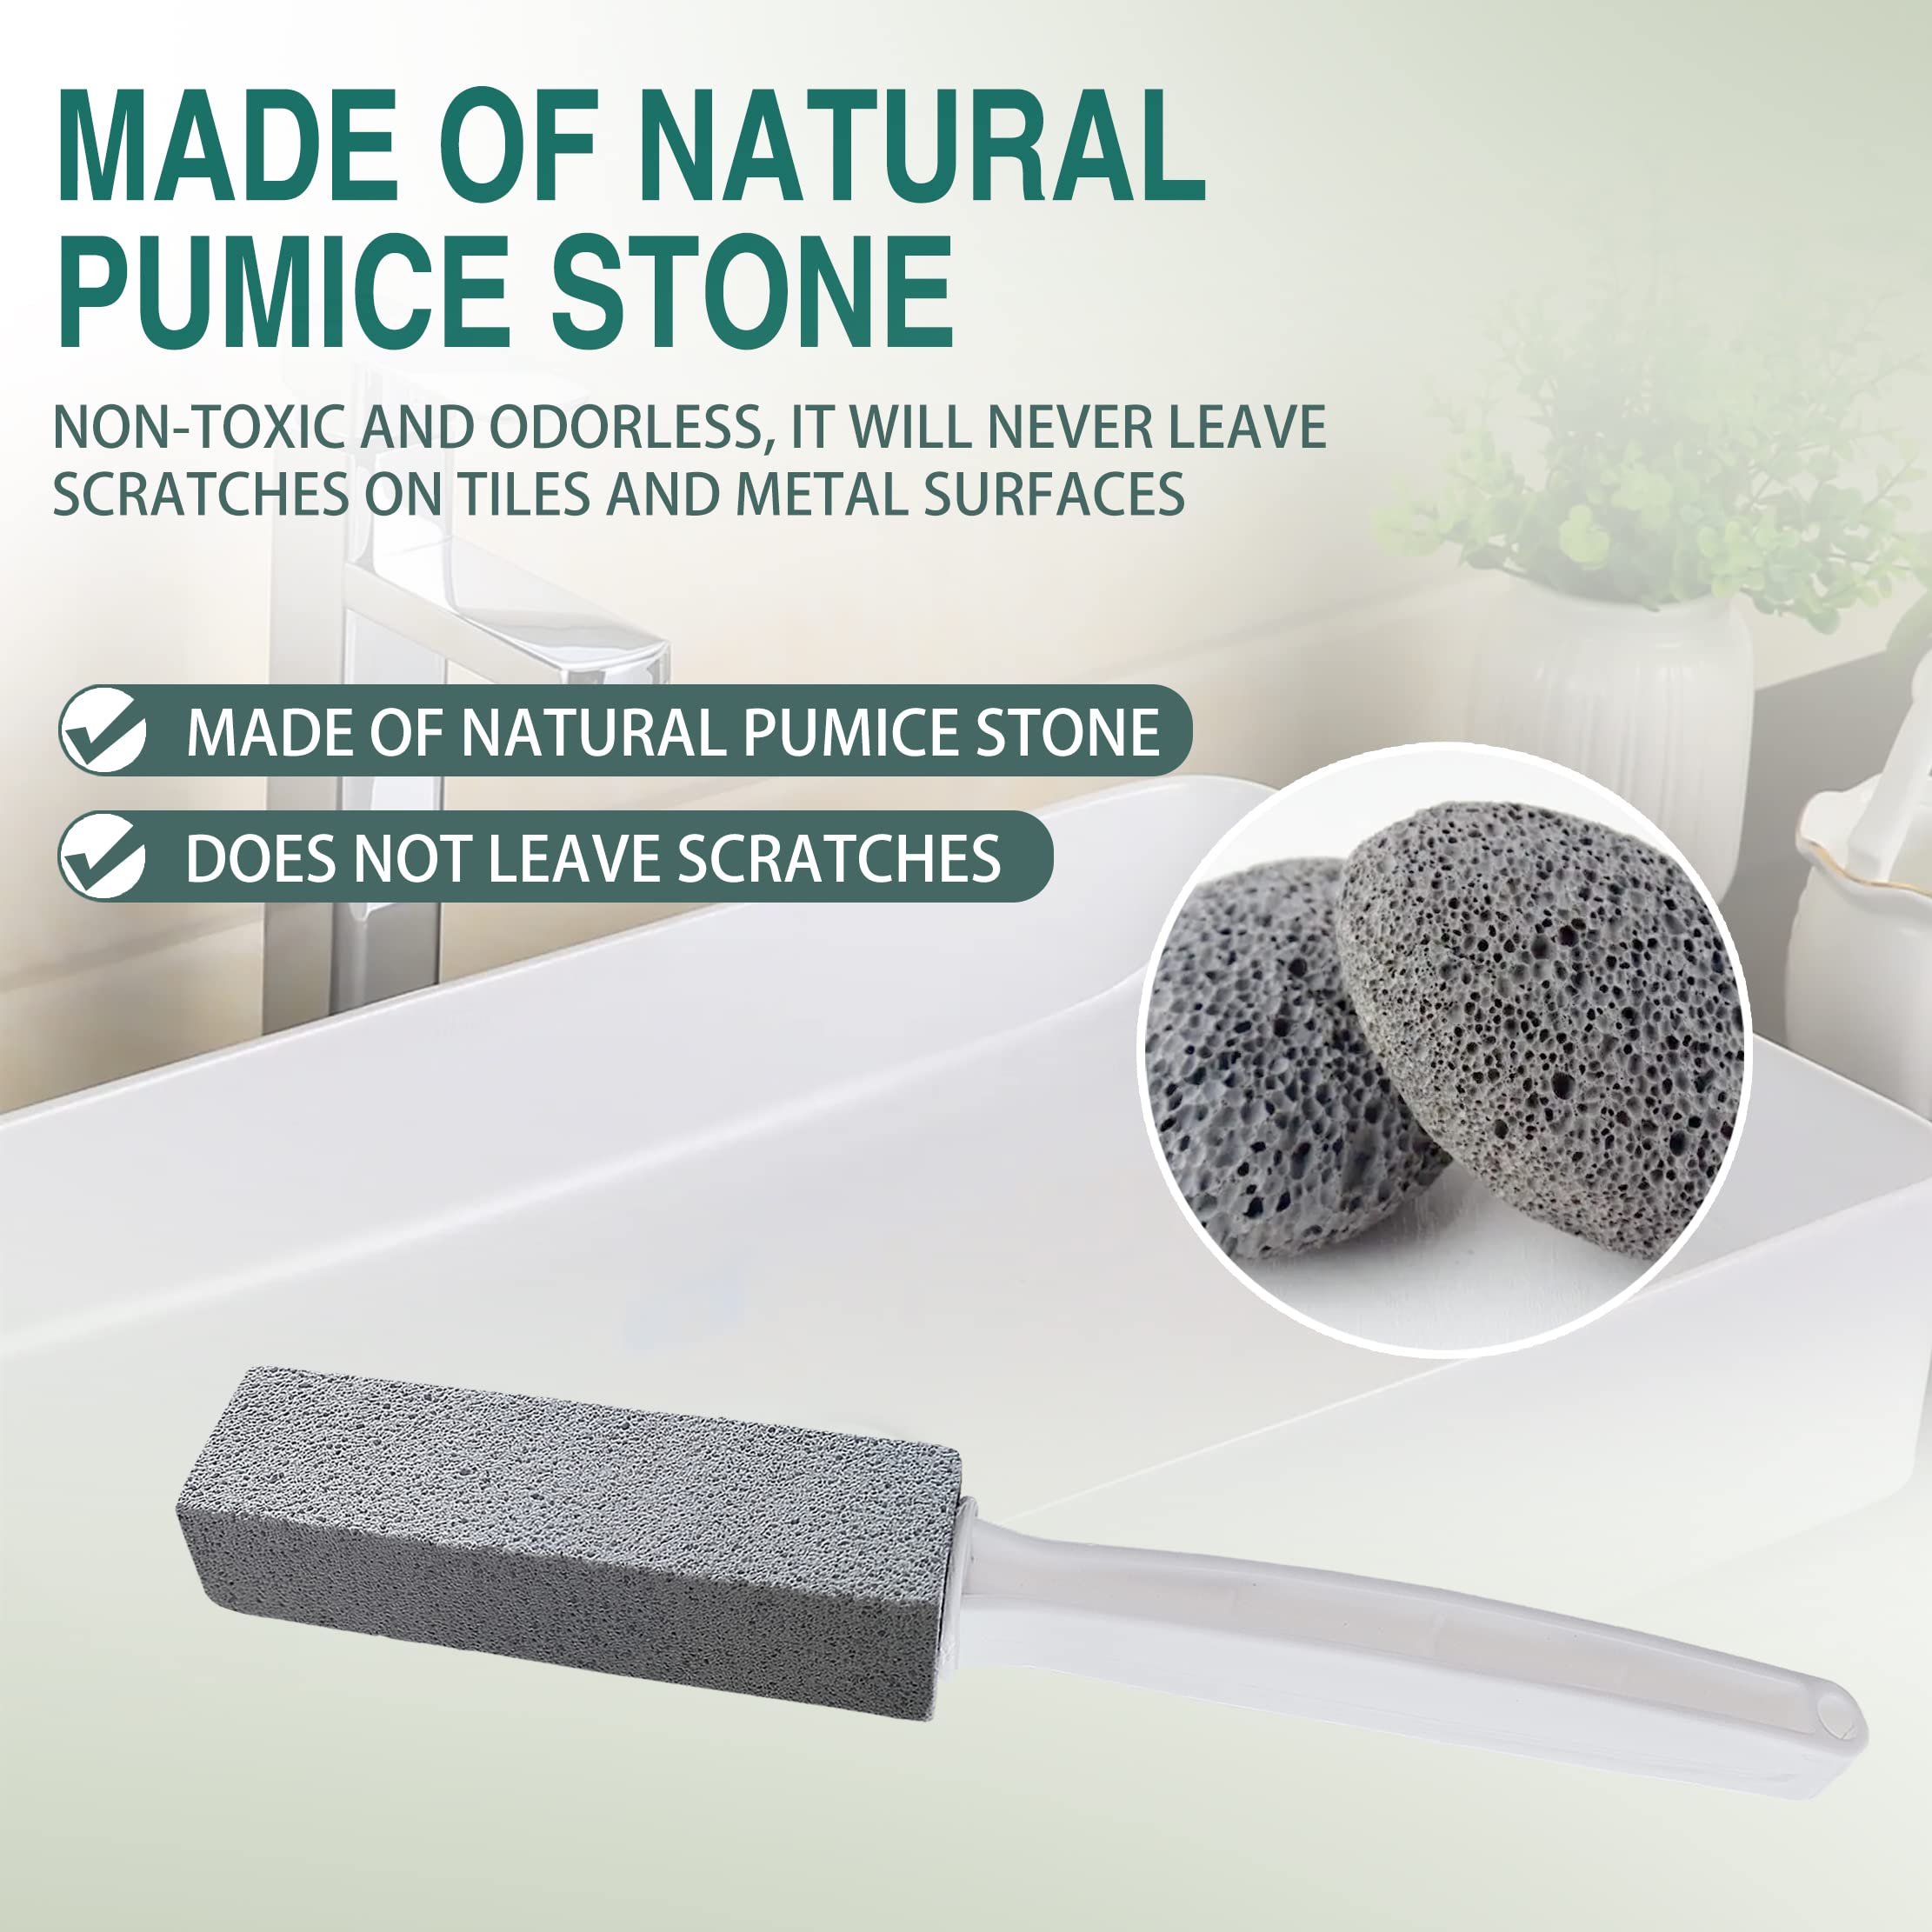 2 ps Pumice Stone Toilet Cleaner Tool Stain Hard Water Ring Remover for Toilet, Pool, Bathroom, Sink (Grey)